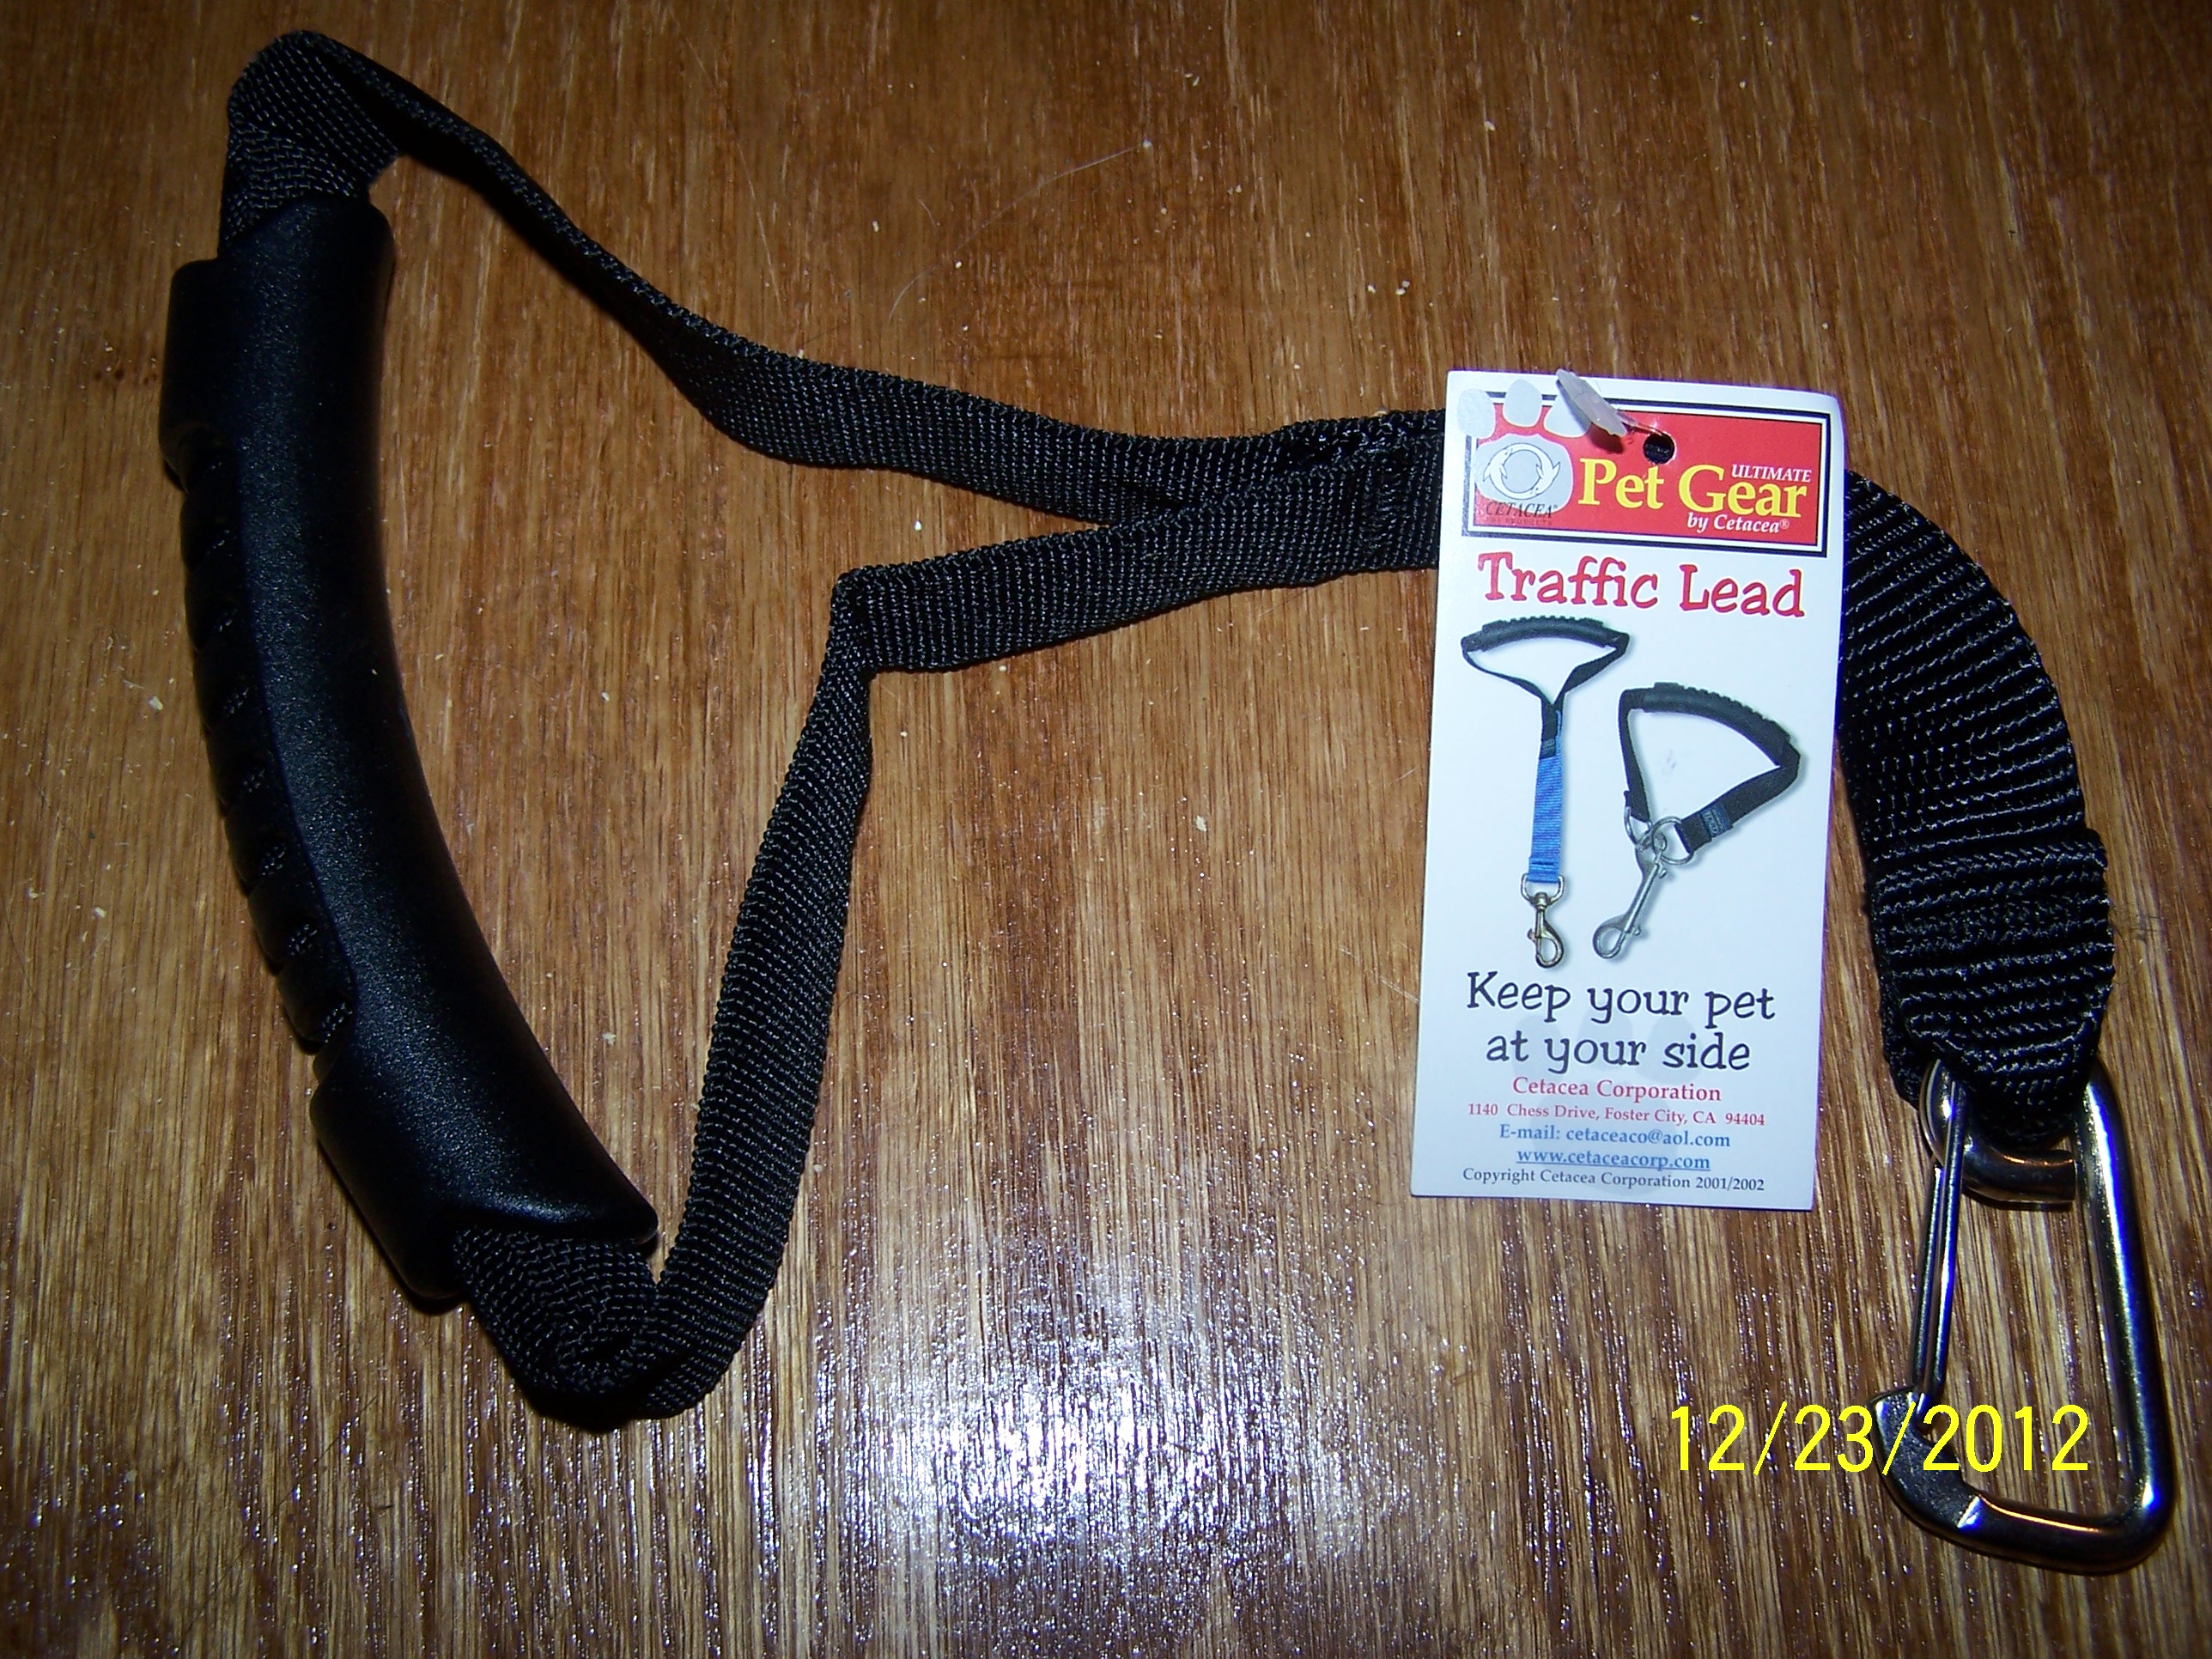 Traffic Lead, Stainless Steel w/ Rubber Handle - 12"